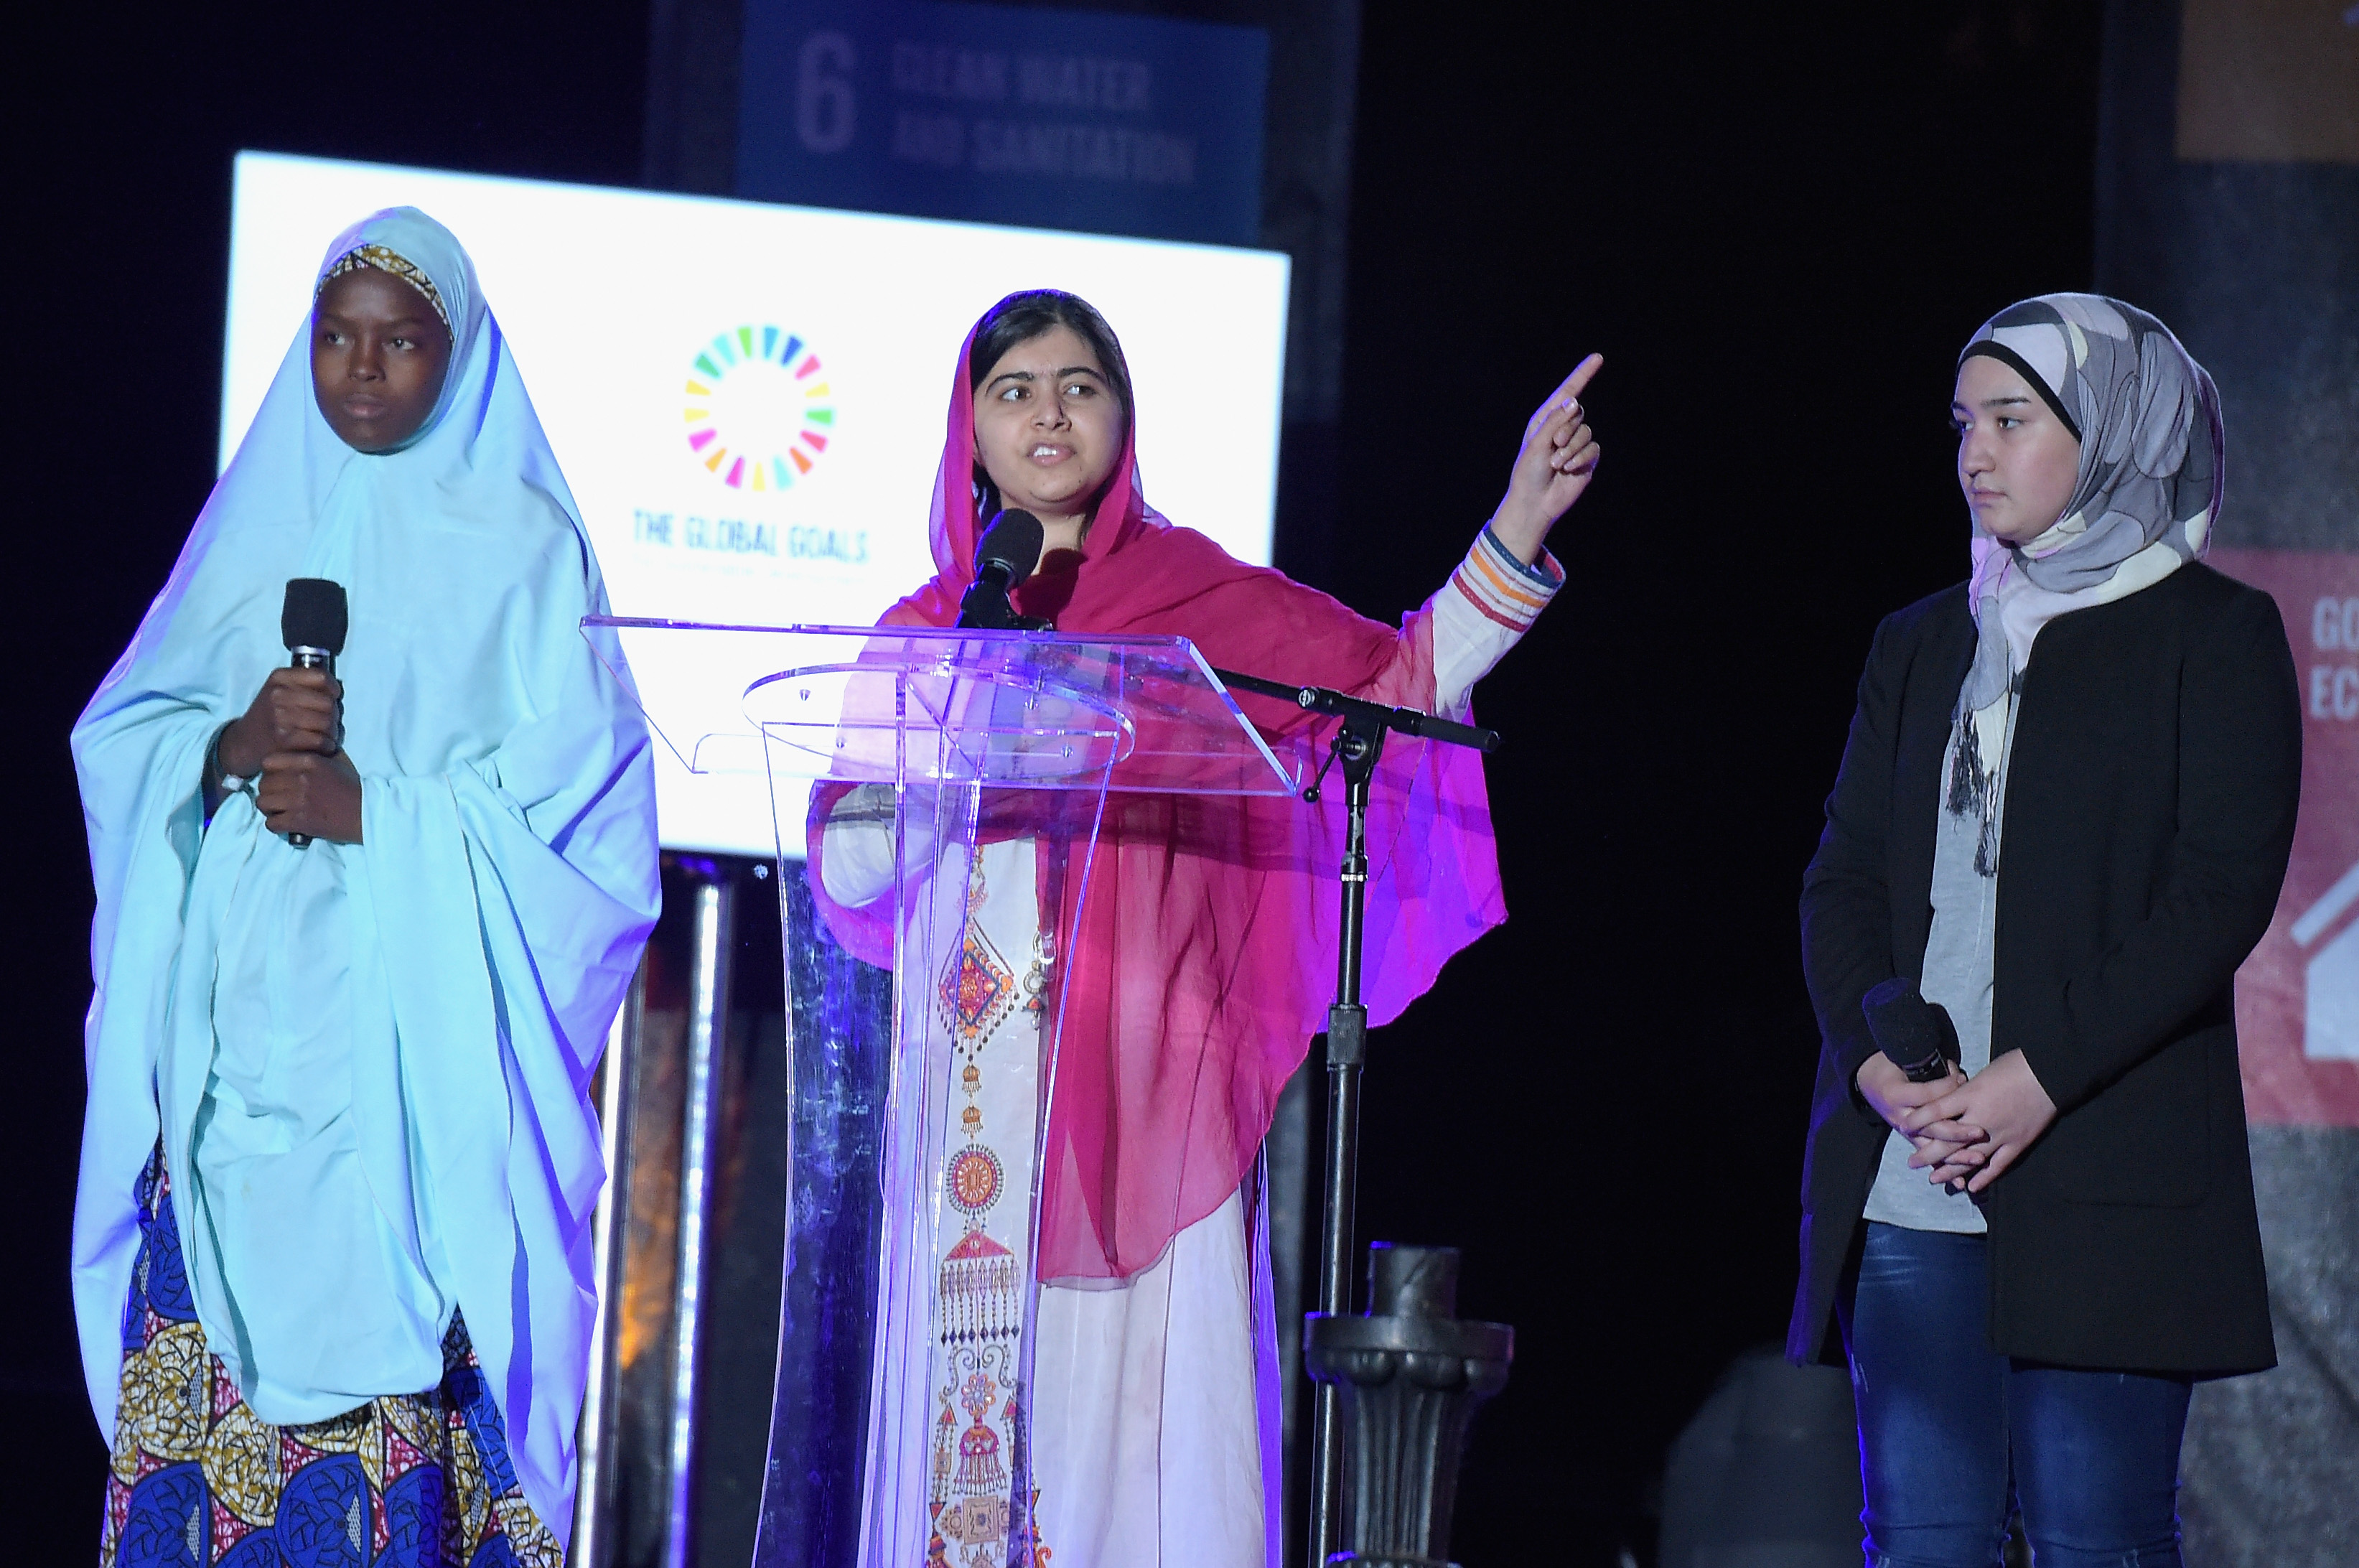 Activist Malala Yousafzai, center, speaks on stage at the 2015 Global Citizen Festival to end extreme poverty by 2030 in Central Park in New York City on Sept. 26, 2015 (Theo Wargo—Getty Images)